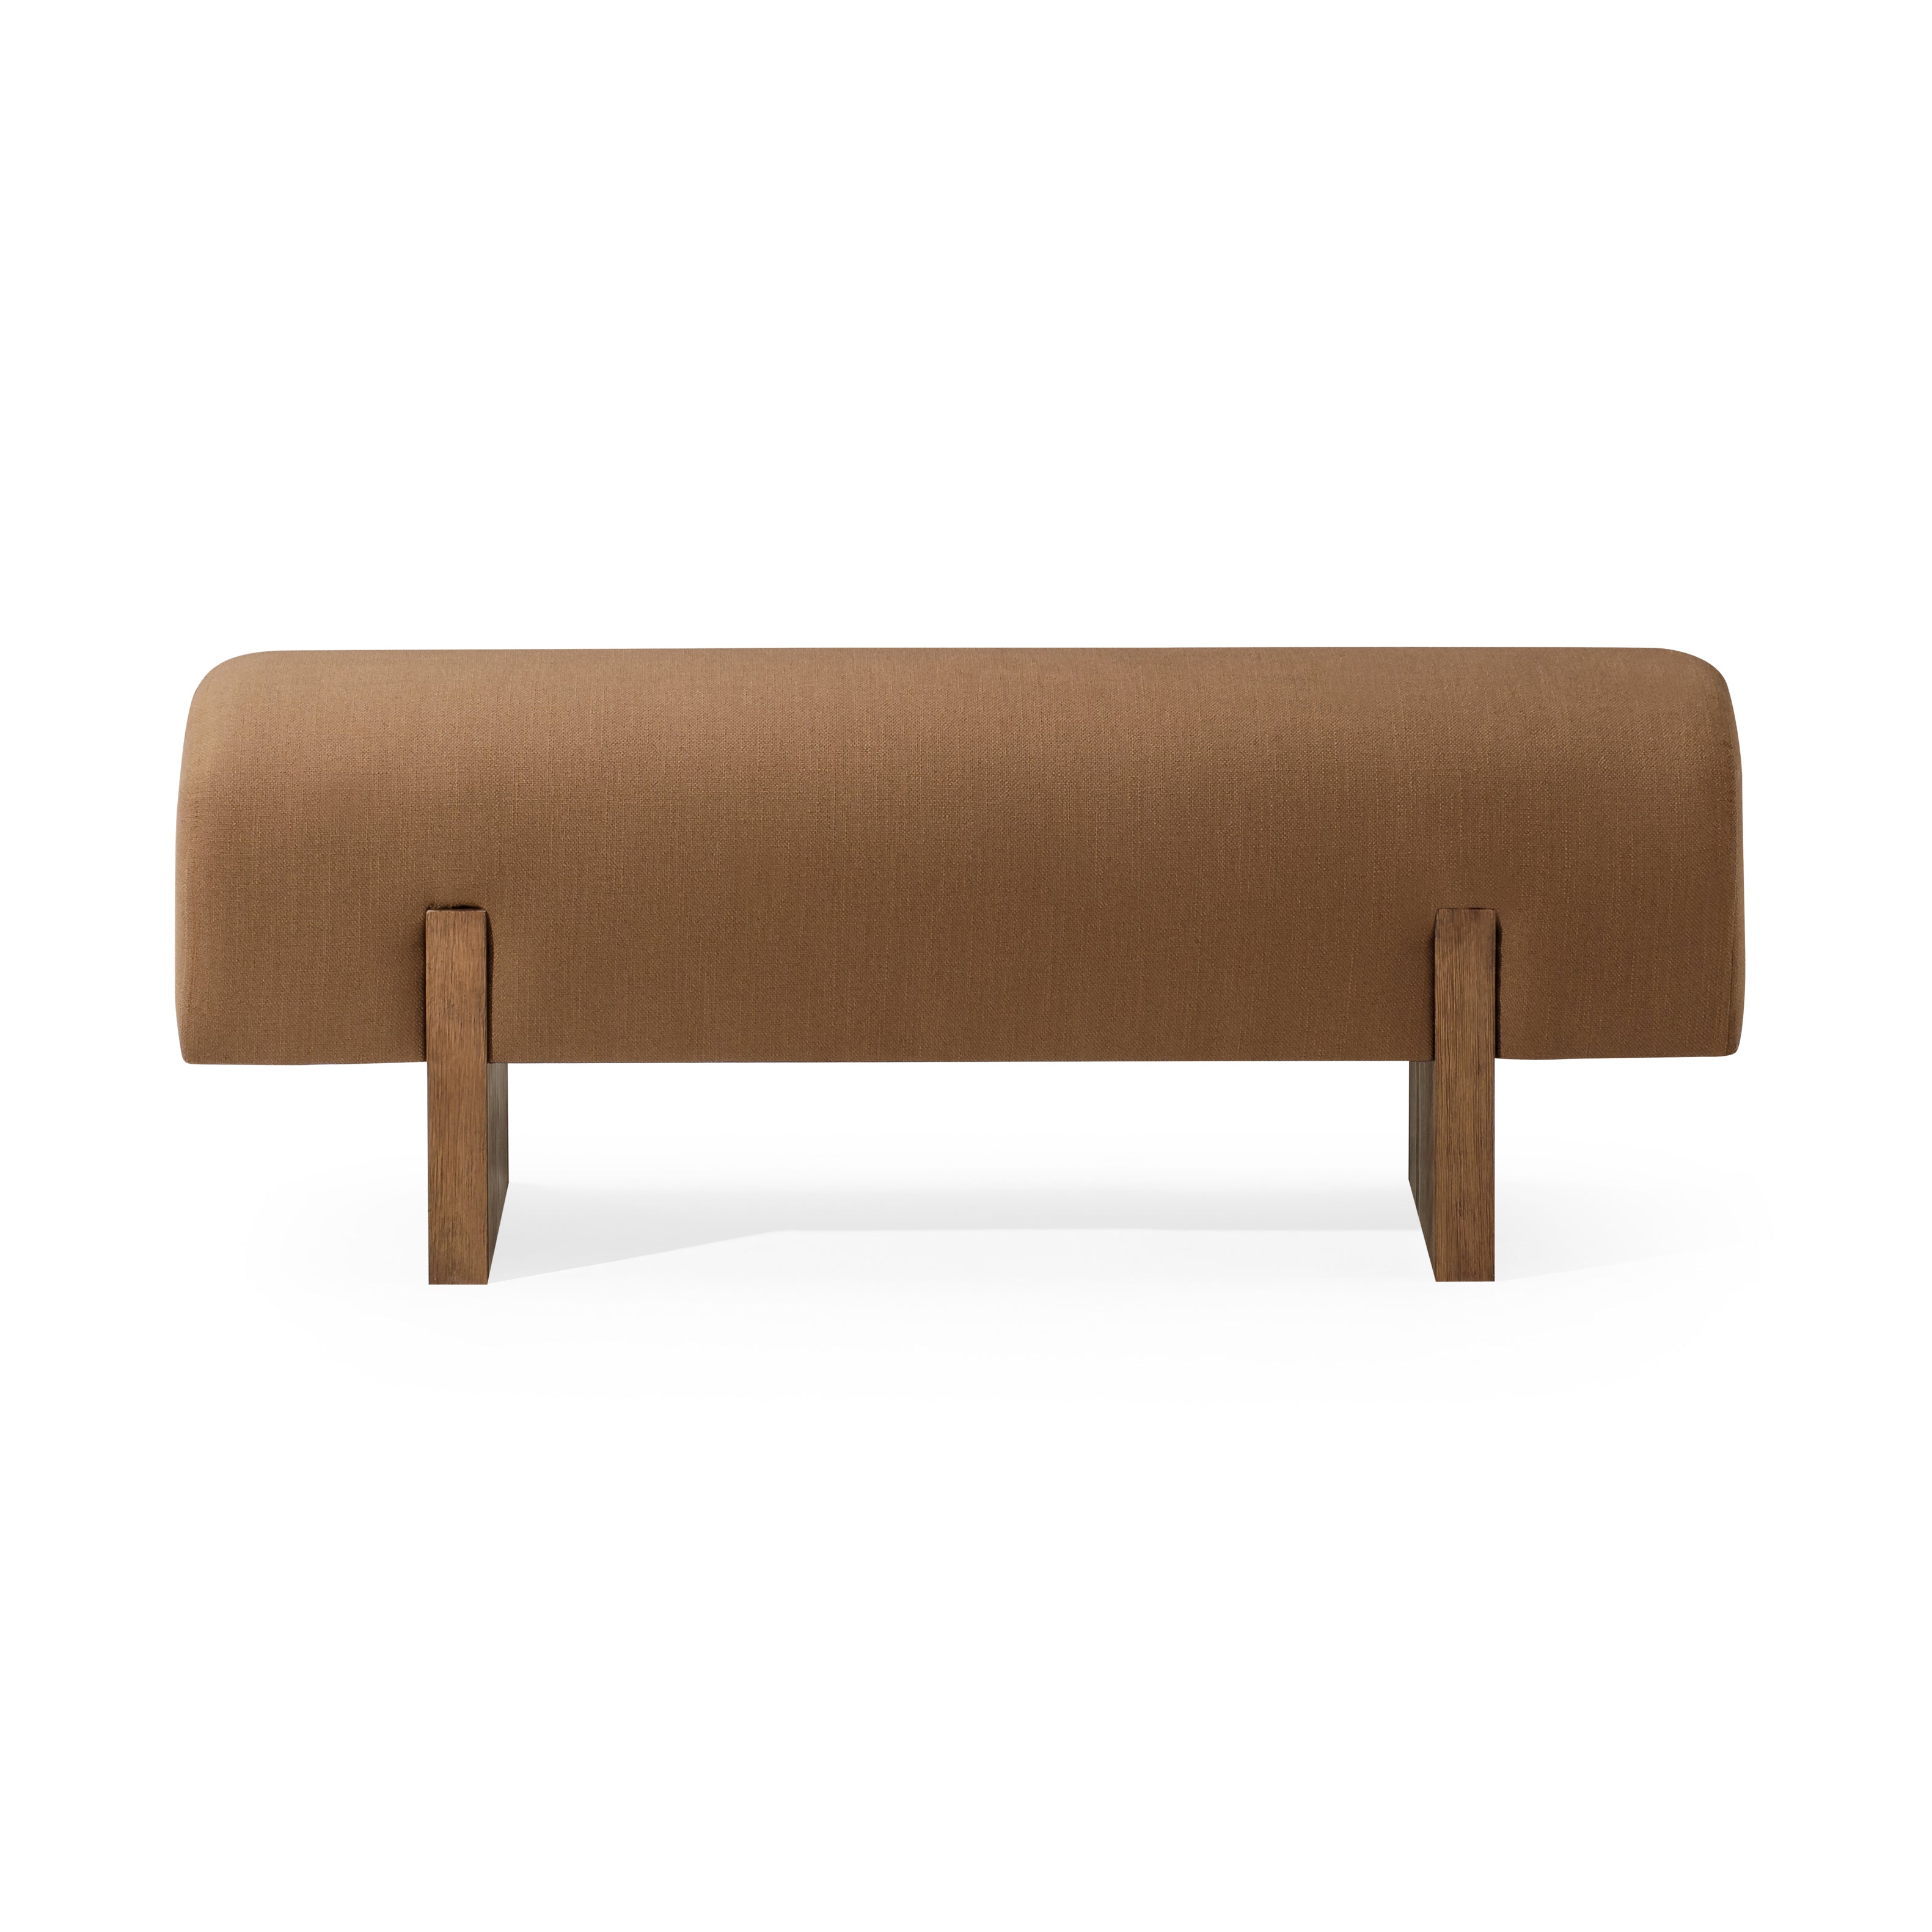 Juno Contemporary Upholstered Wooden Bench in Refined Brown Finish in Ottomans & Benches by Maven Lane